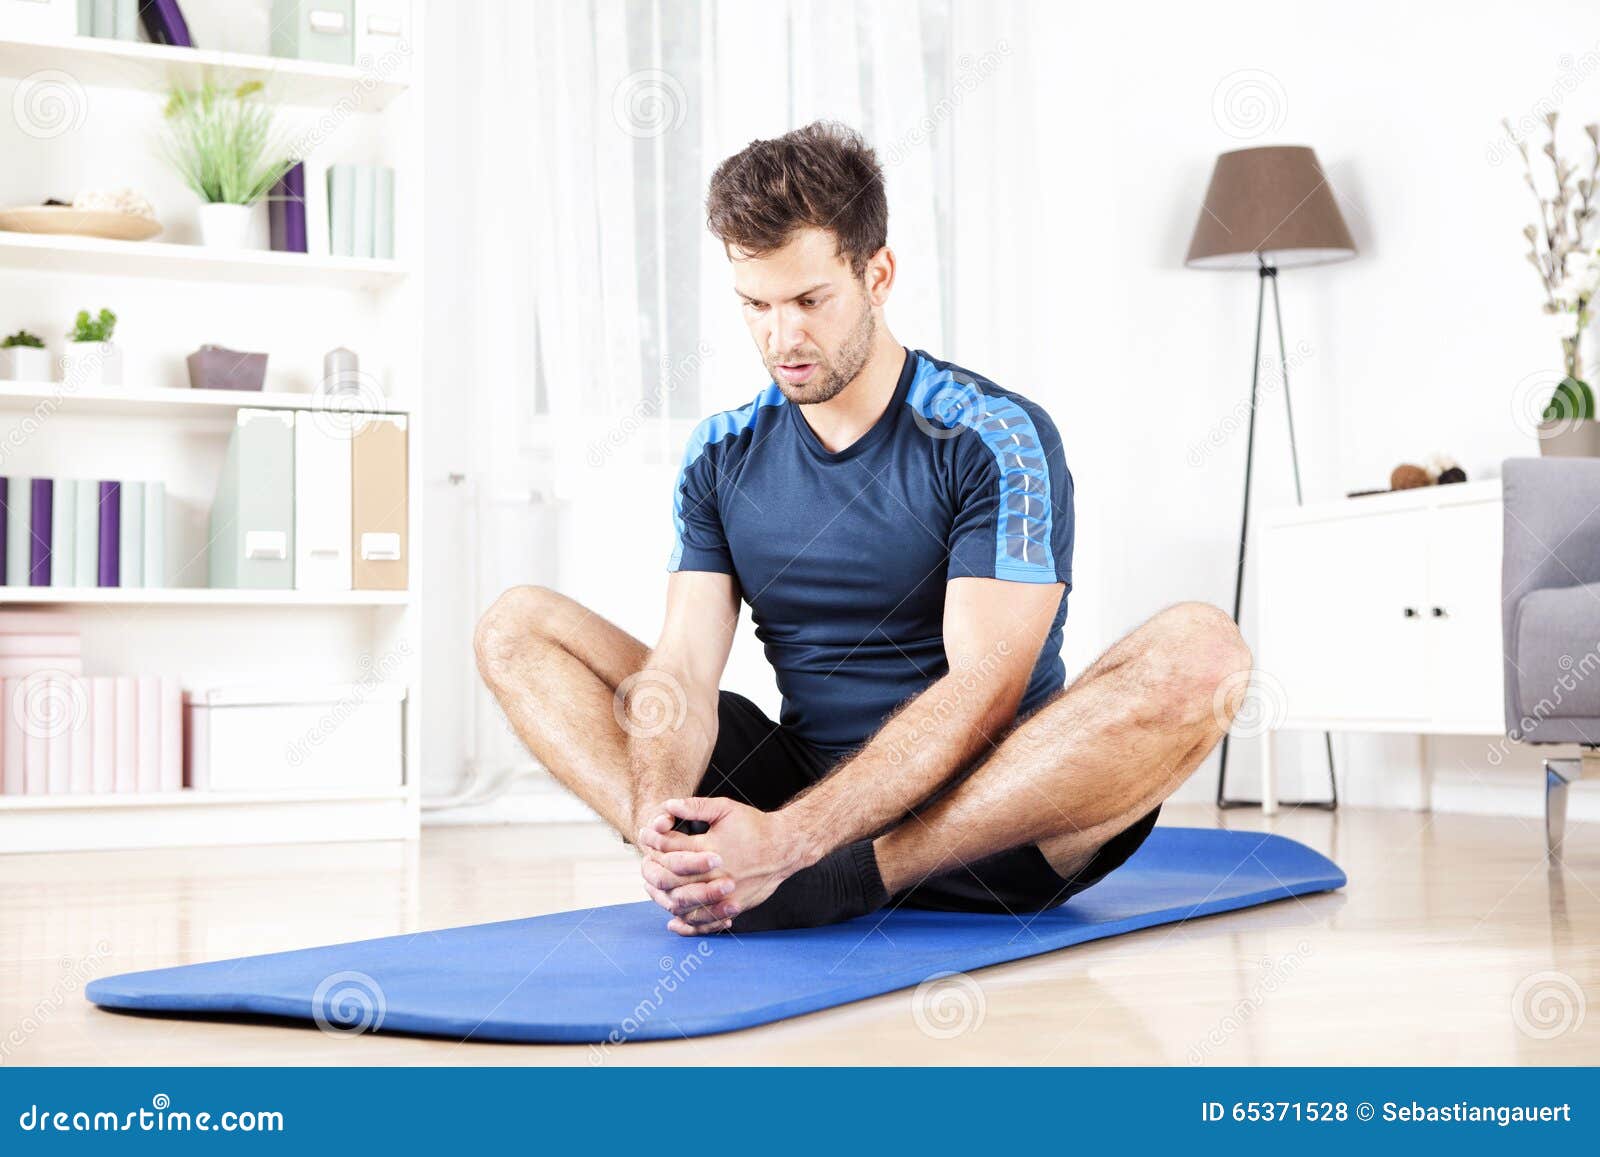 Athletic Man Doing Seated Adductor Stretch at Home Stock Photo